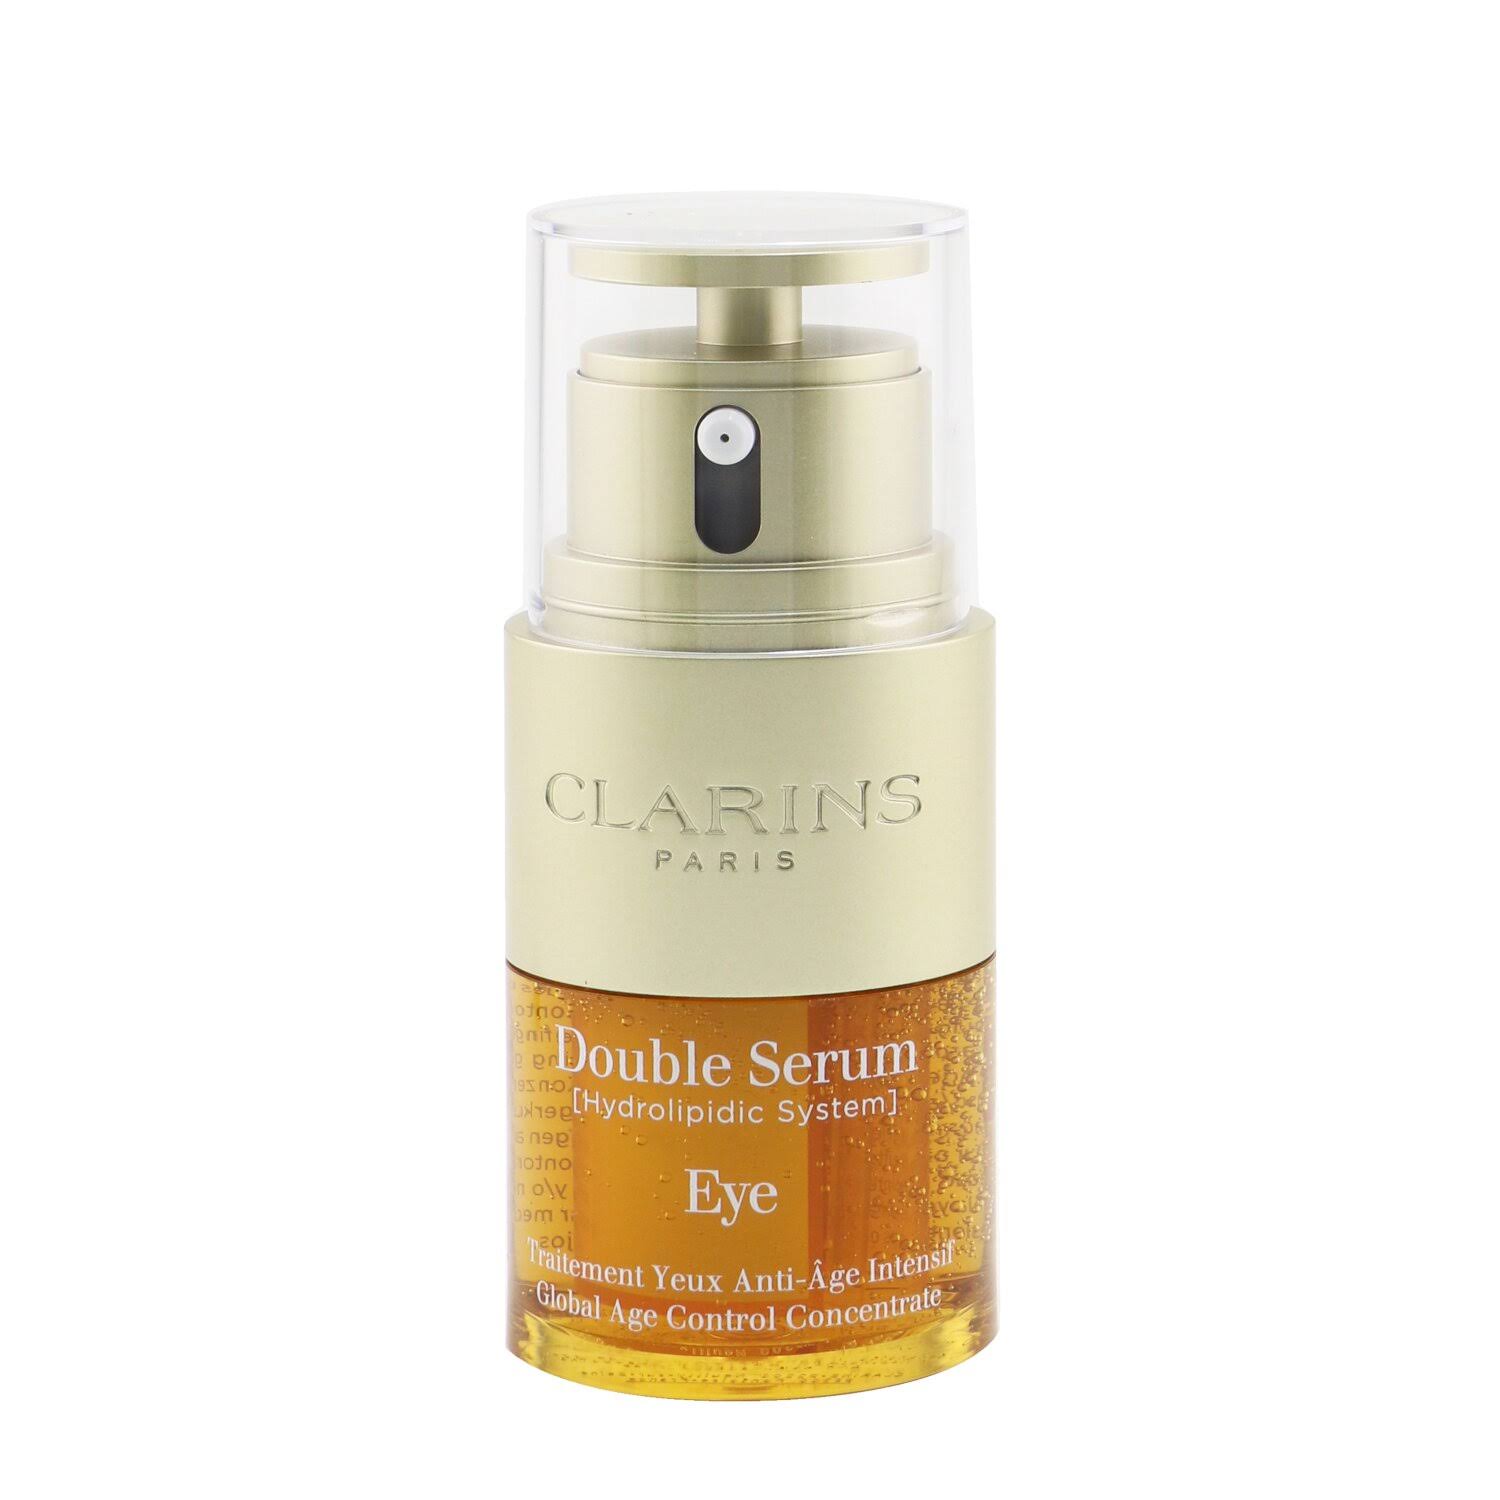 Clarins Double Serum Eye 20ml - Global Age Control Concentrate